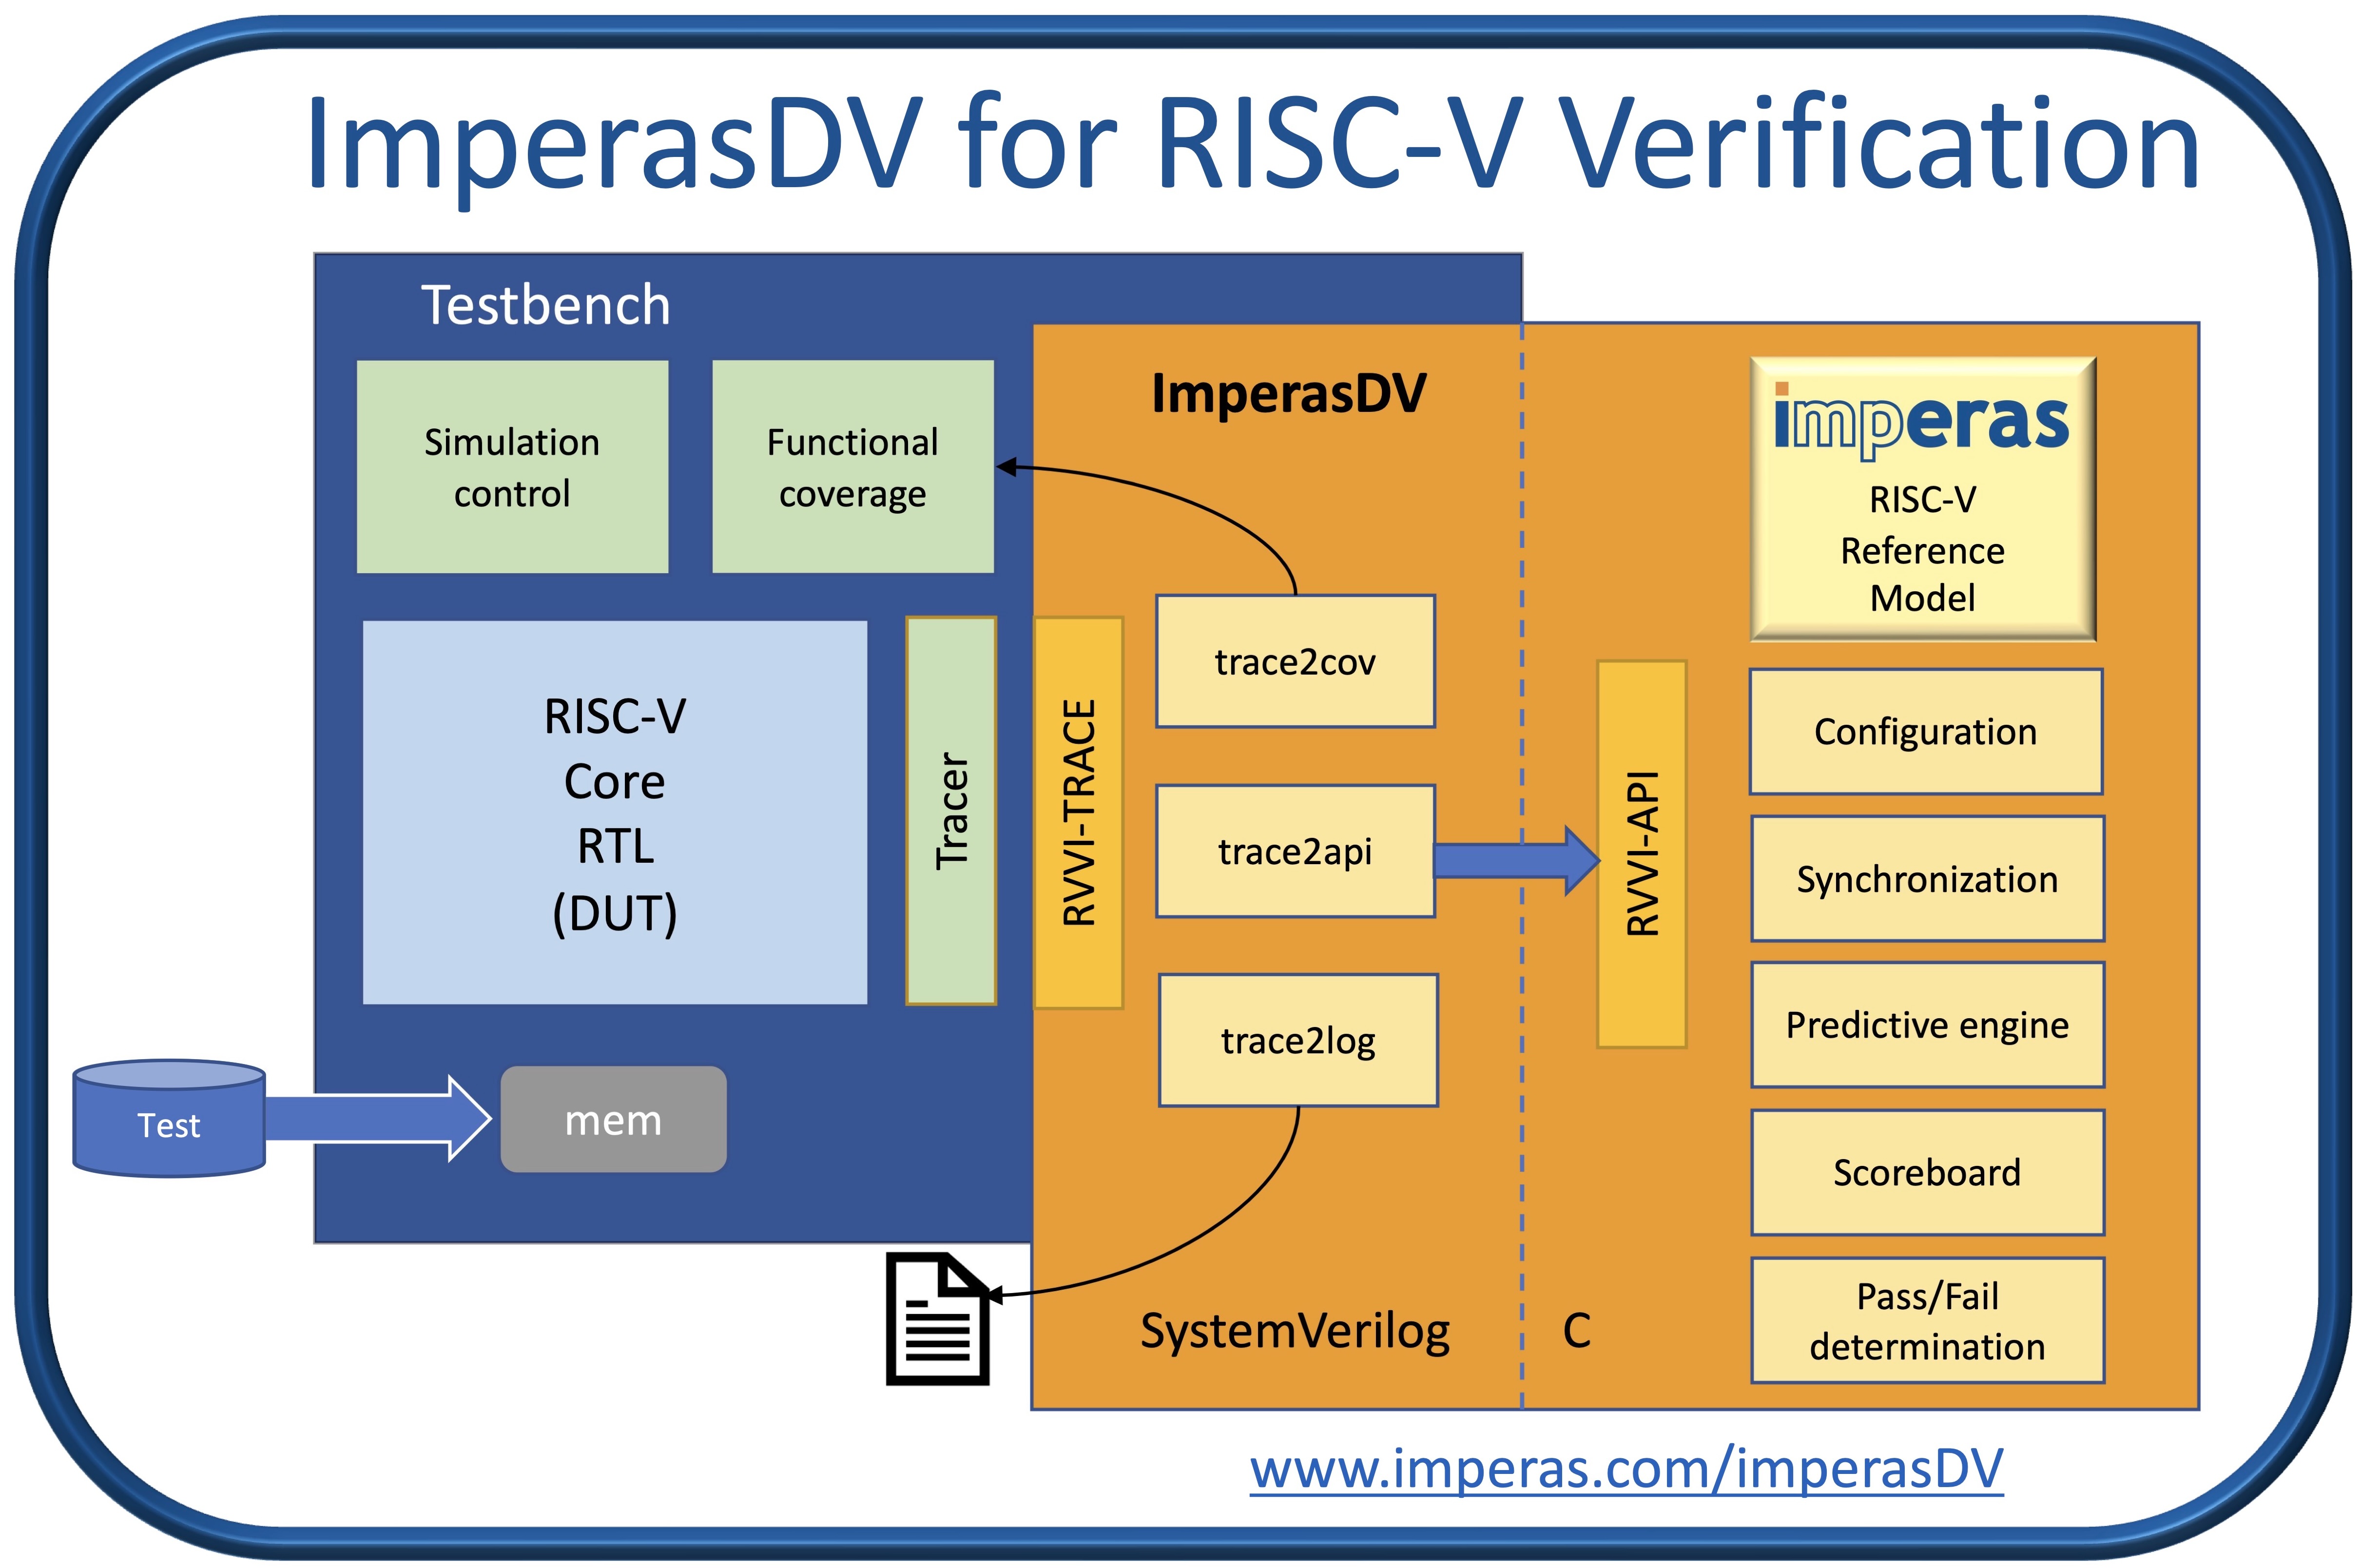 Imperas Releases new Updates, Test Suites, and Functional Coverage Library to Support the Rapid Growth in RISC-V Verification